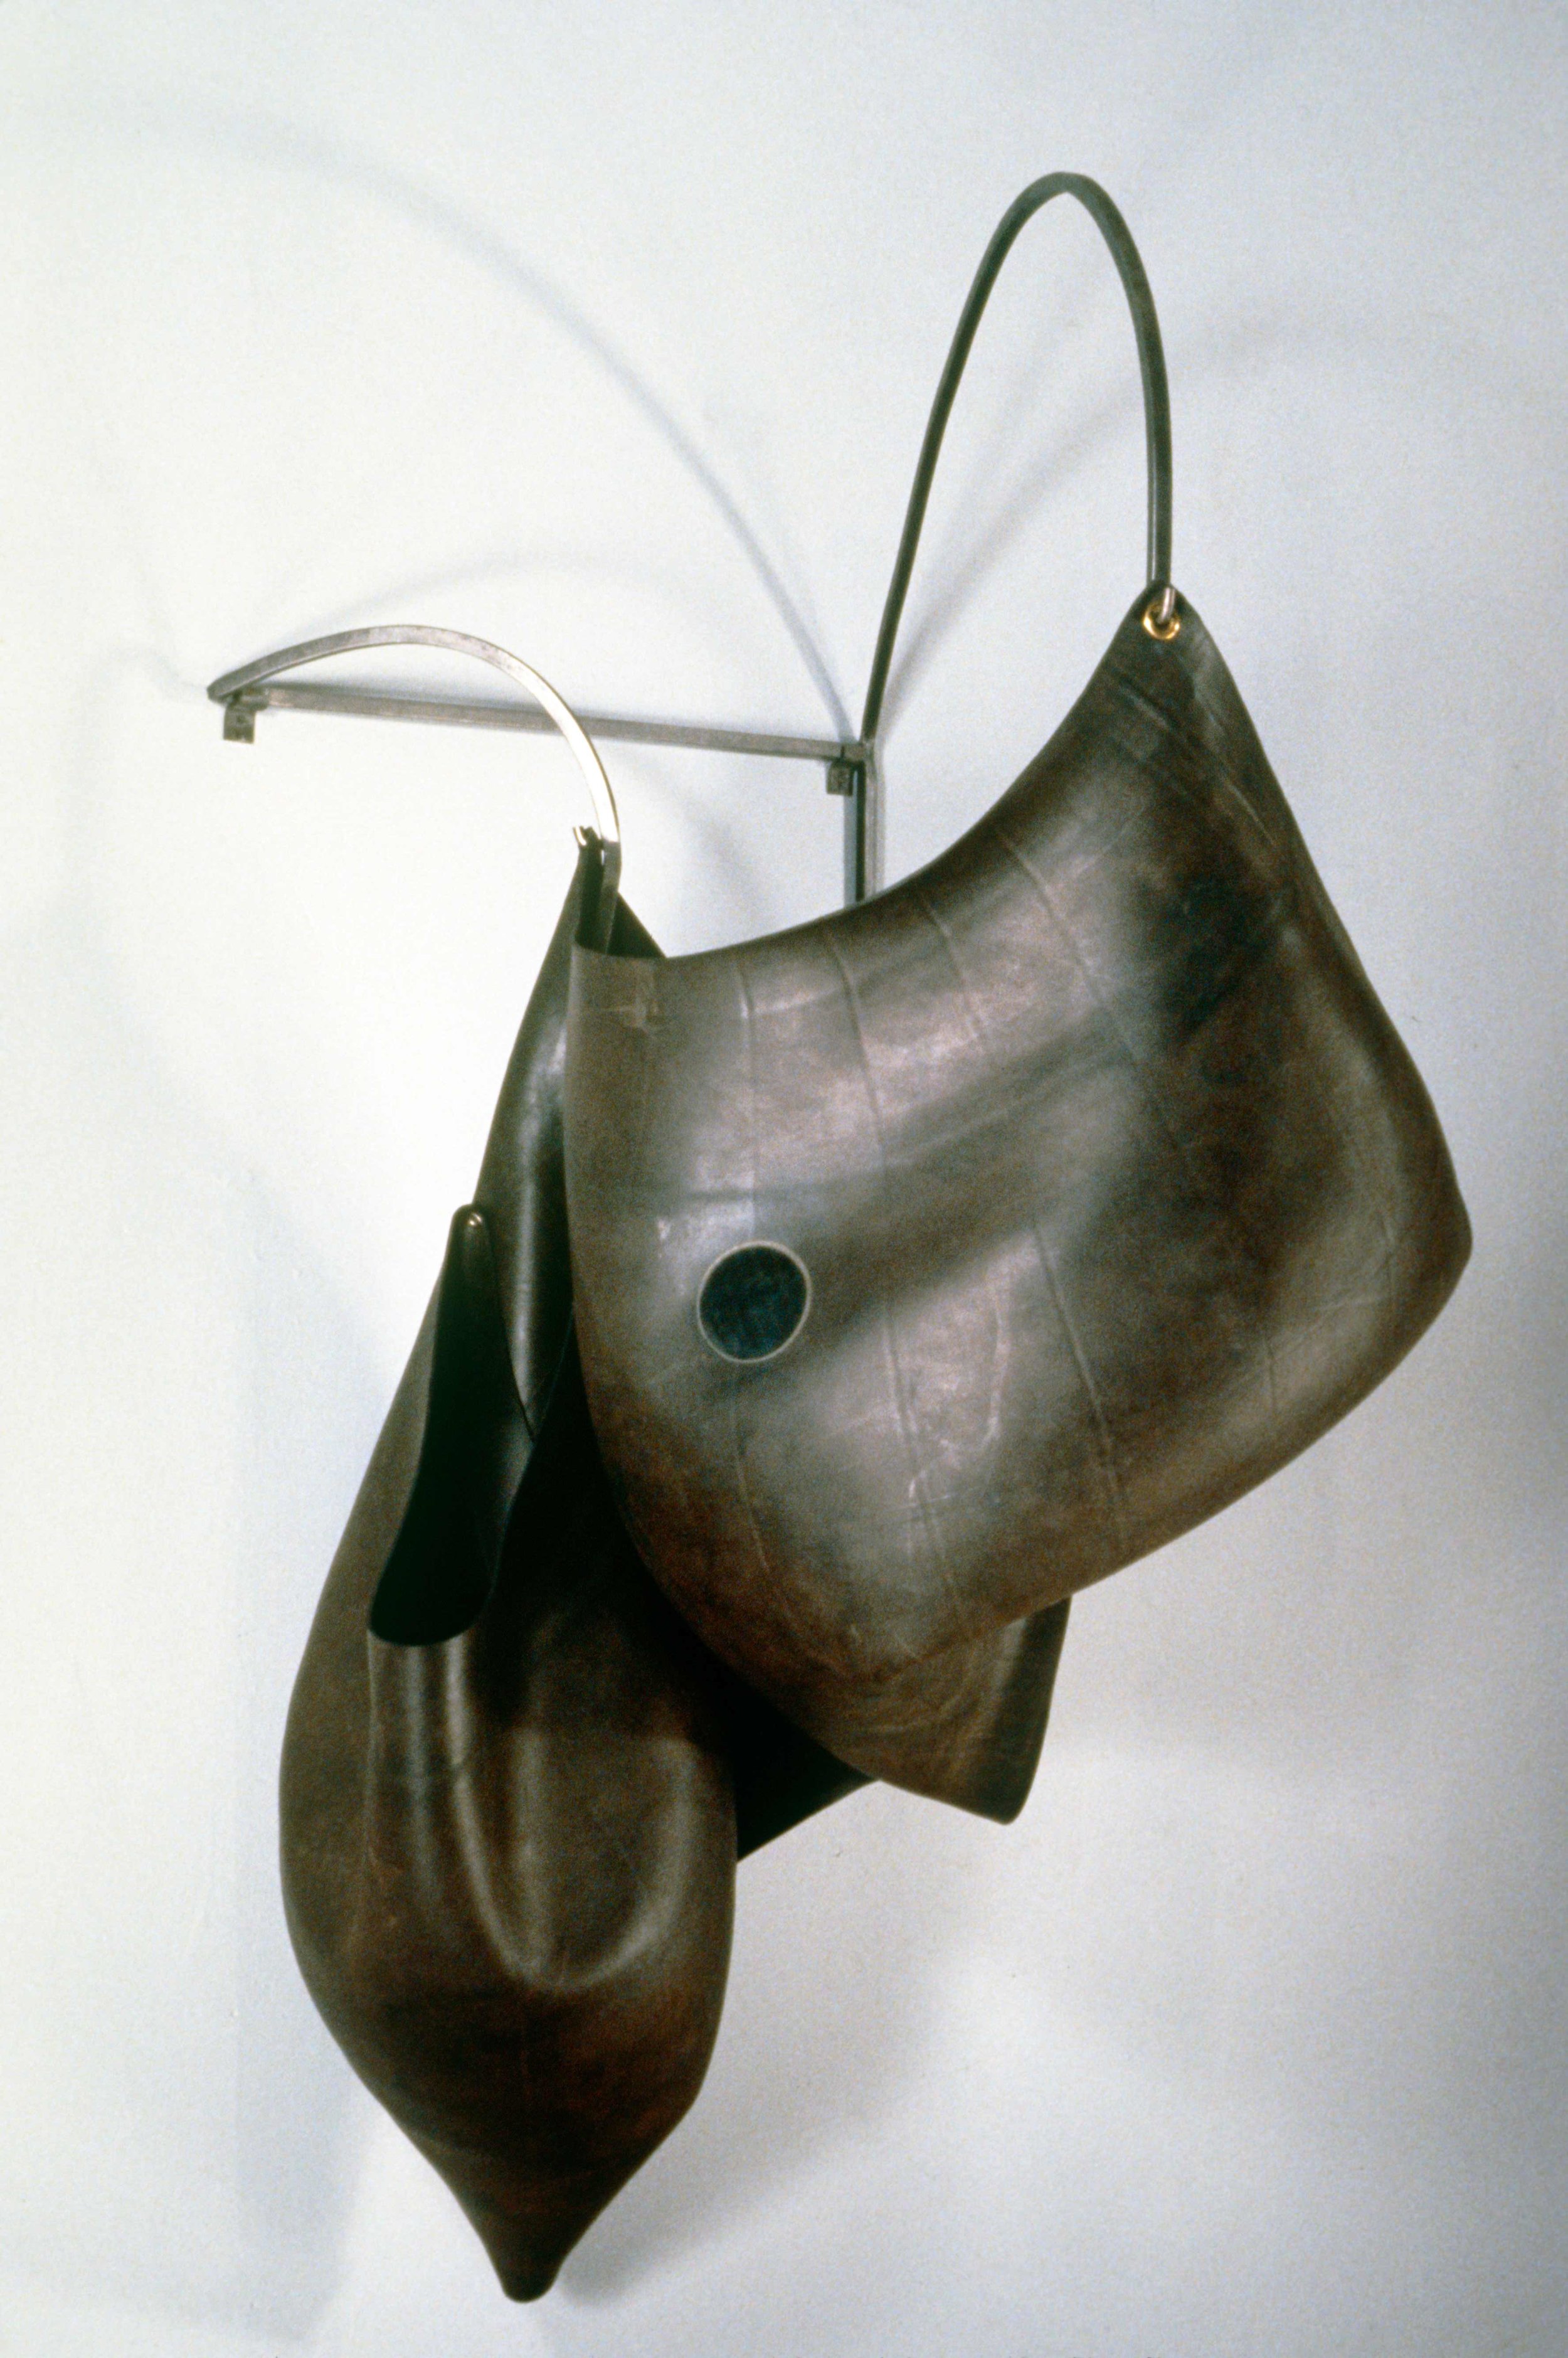   Untitled 90.2   1990  rubber and steel  60 X 32 X 34"   